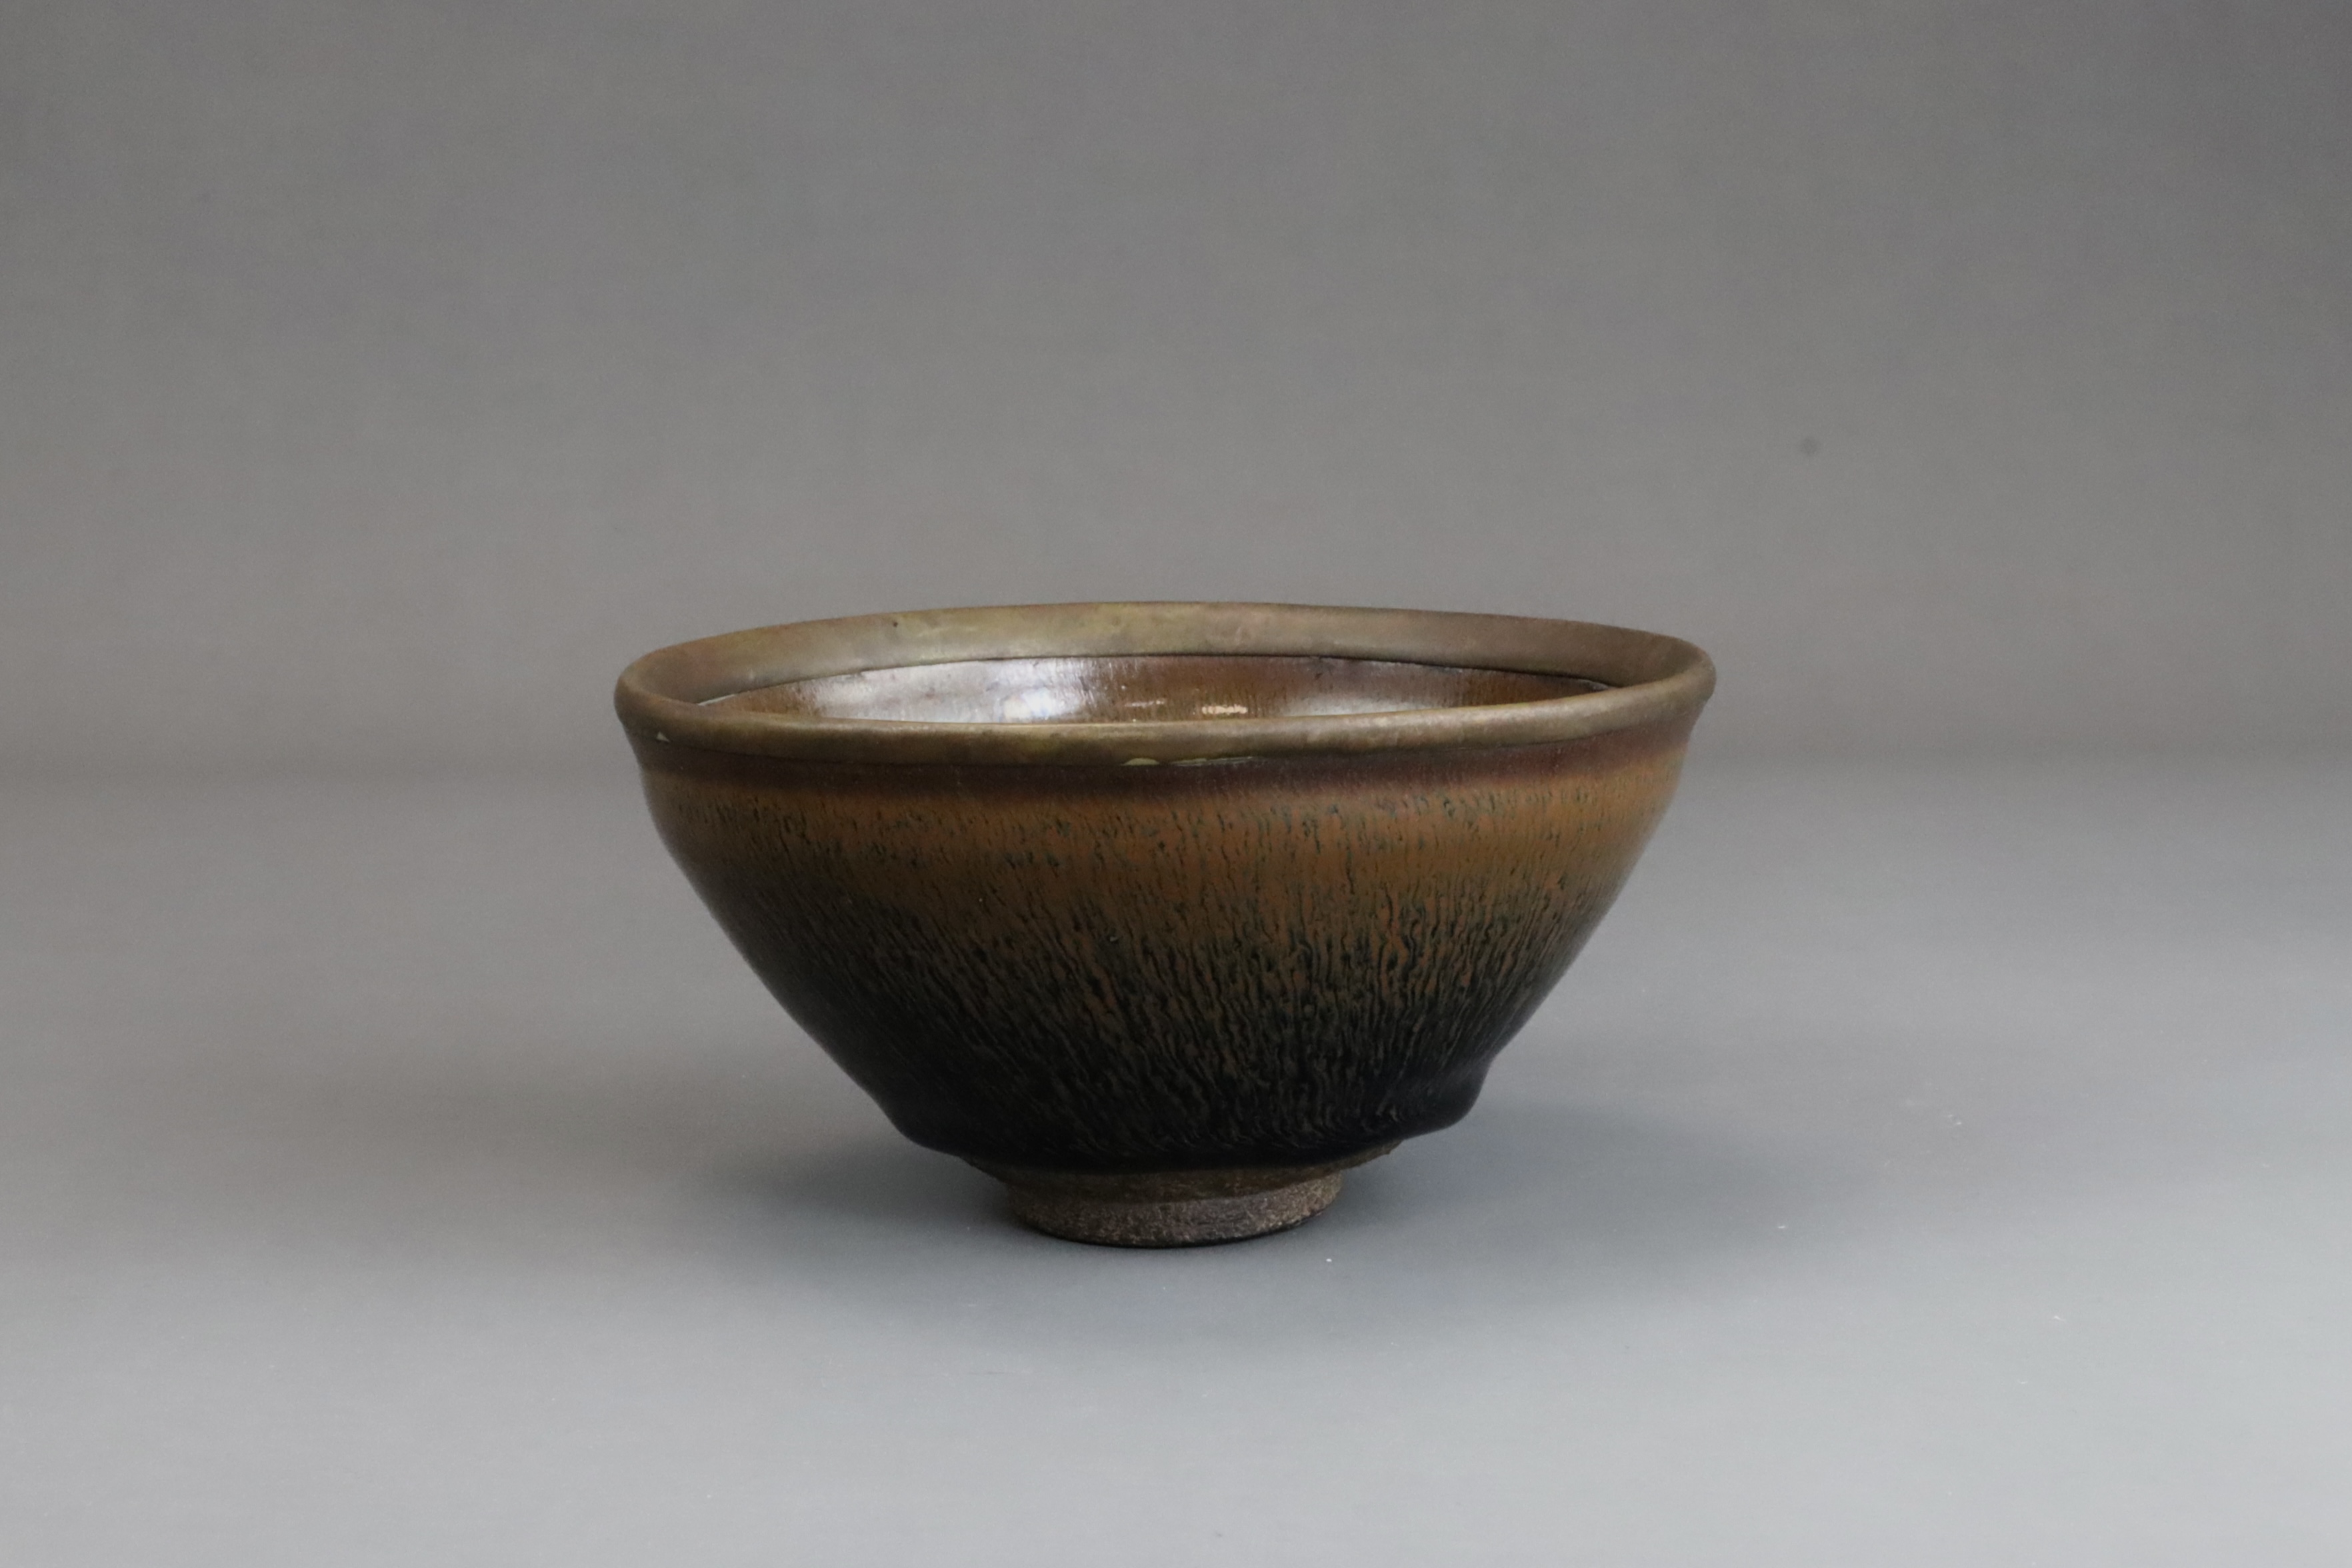 A Jian ware 'Hare's fur' Bowl, Song dynasty - Image 7 of 10